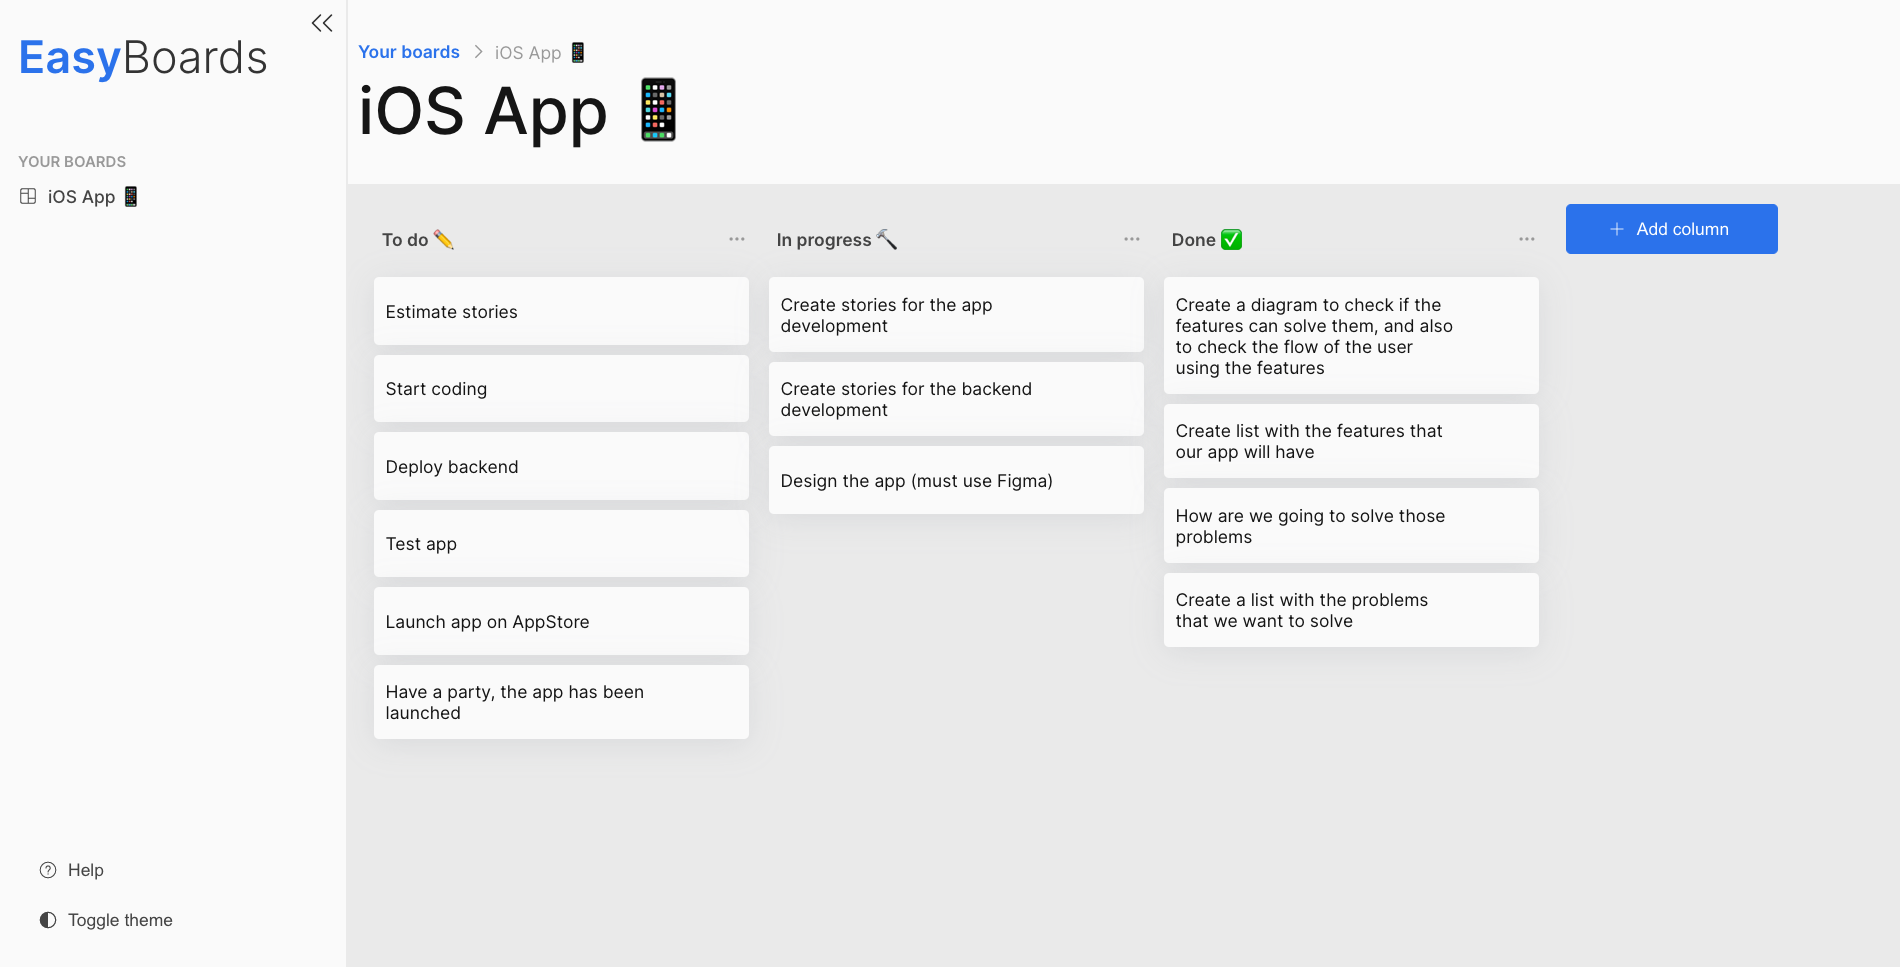 A board called iOS App, with three columns and some tasks.